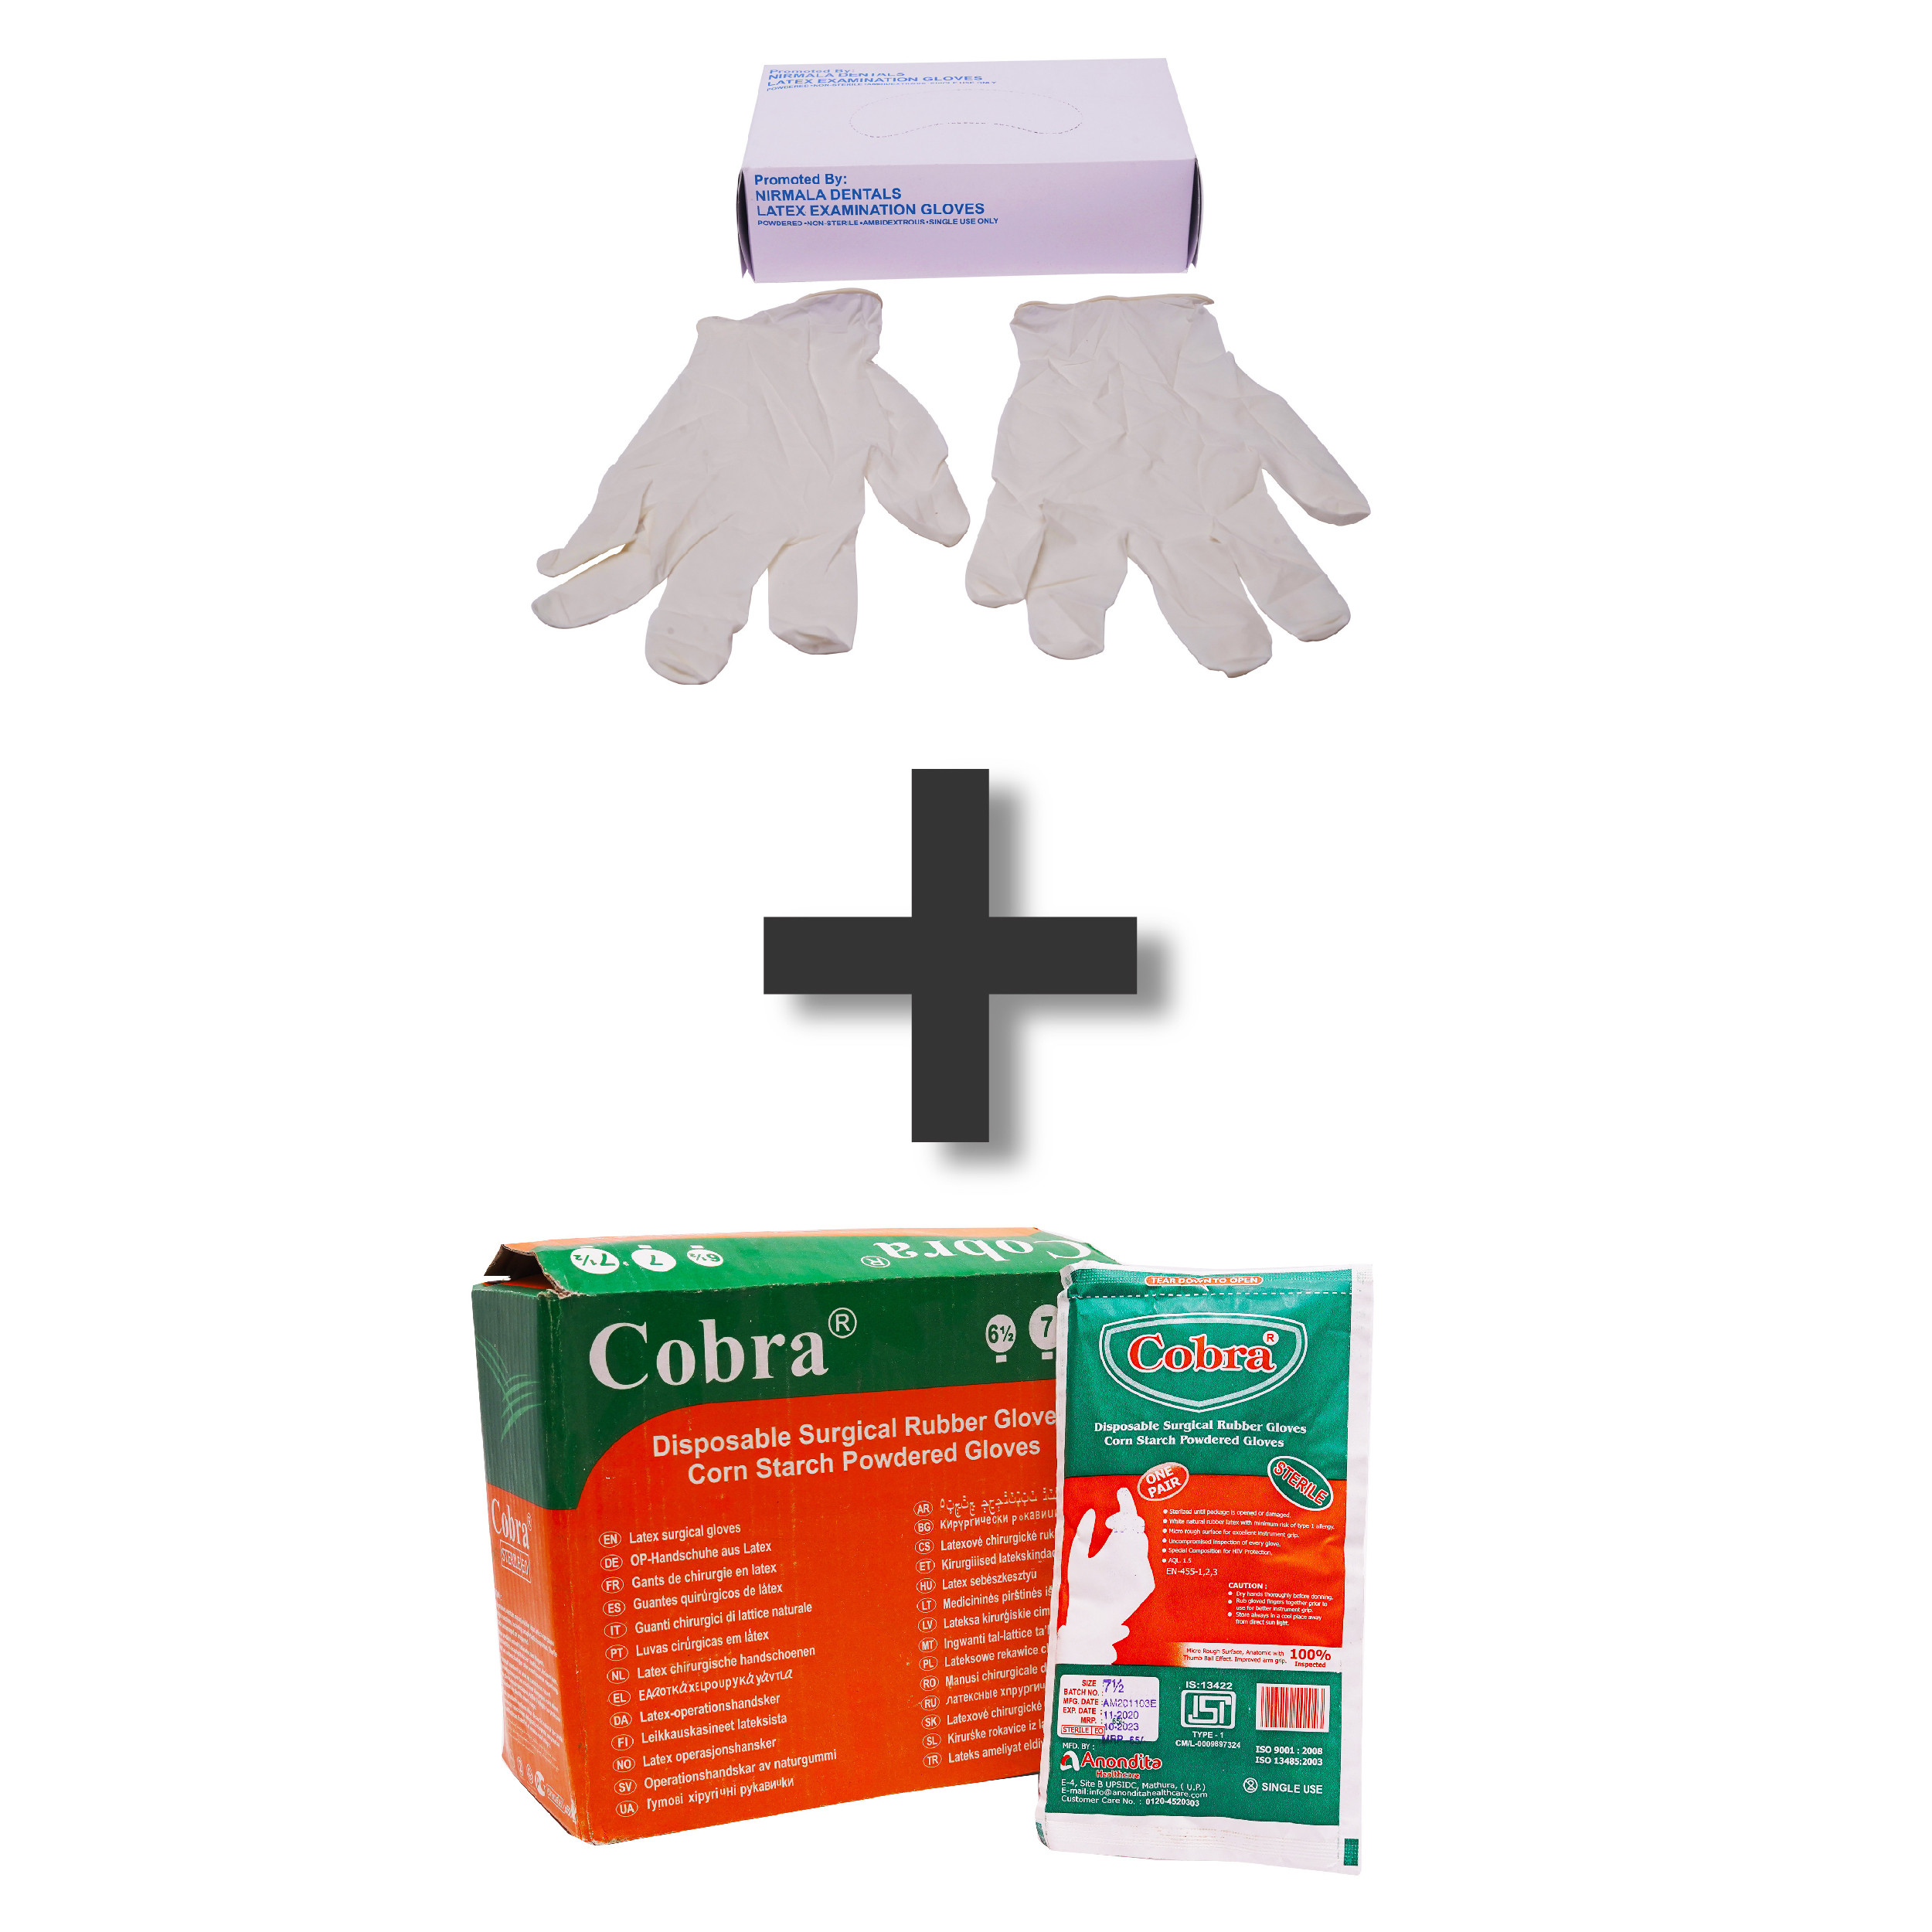 Cobra Disposable Surgical Rubber Gloves (Corn Starch Powdered Gloves) 50pcs Sterilized with Latex Examination Gloves 100 pcs Free